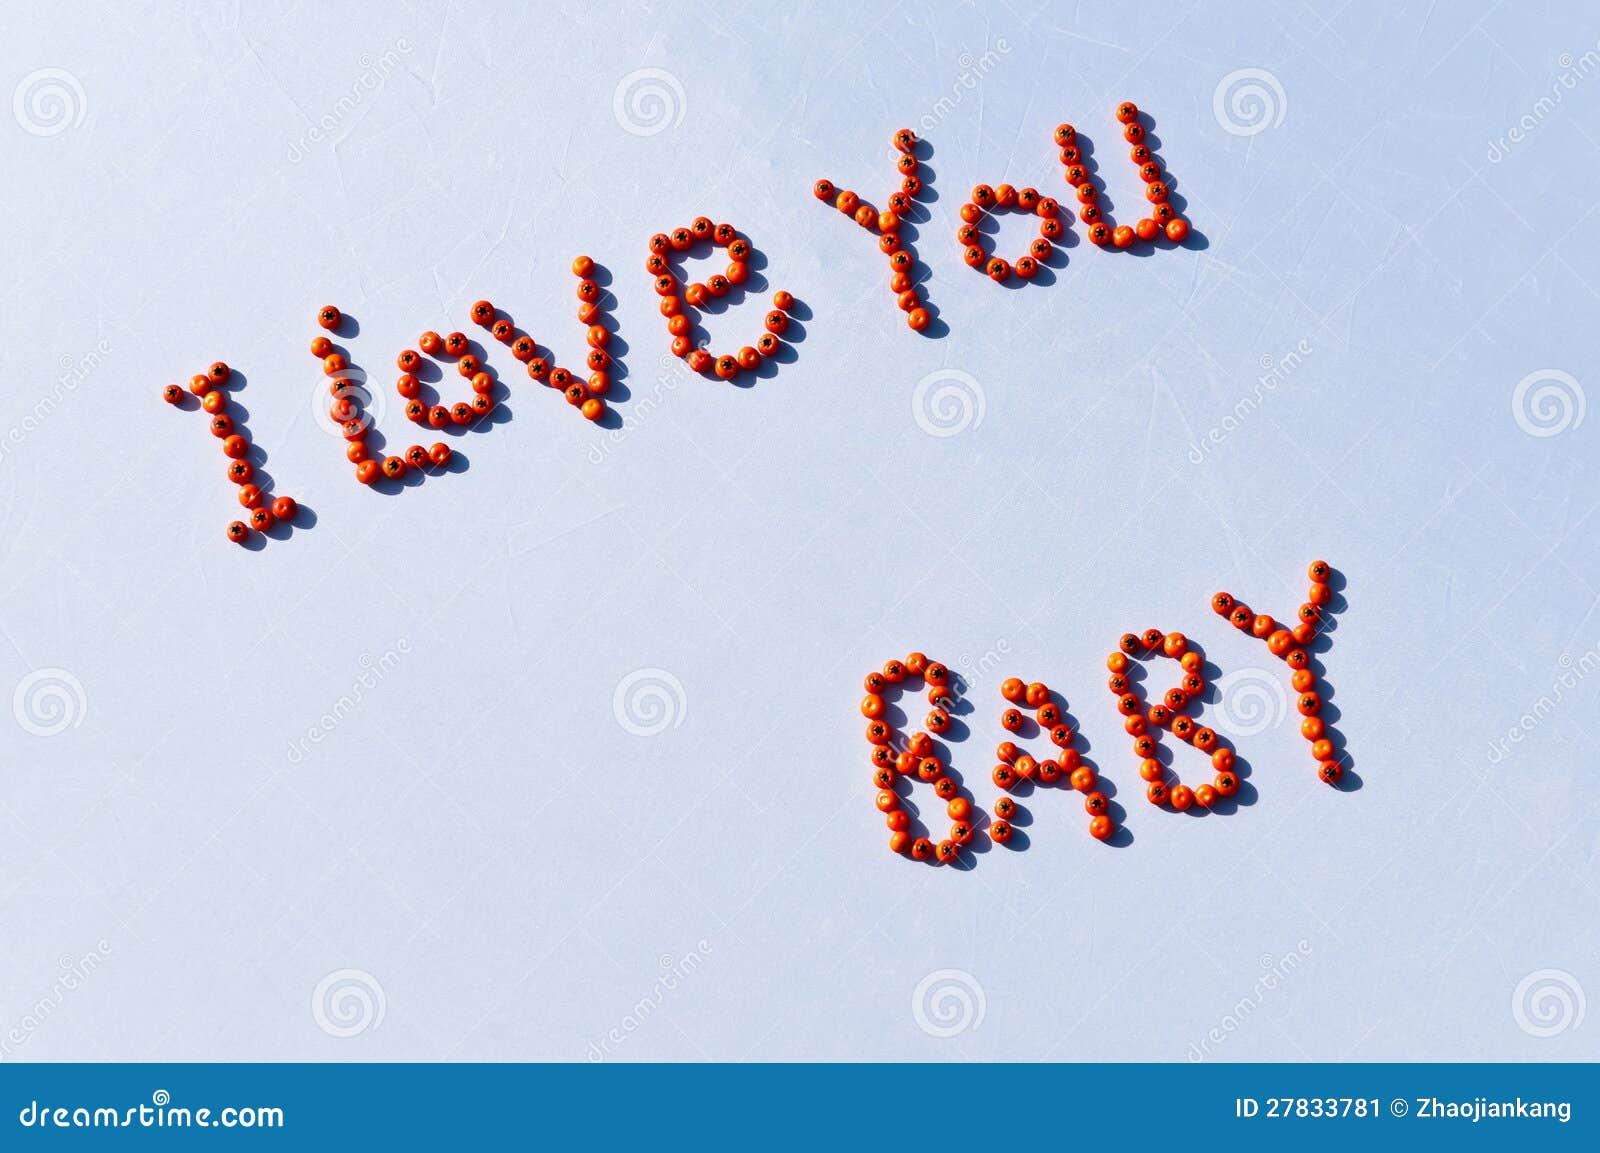 I Love You Baby Stock Image Image Of Romantic Seed